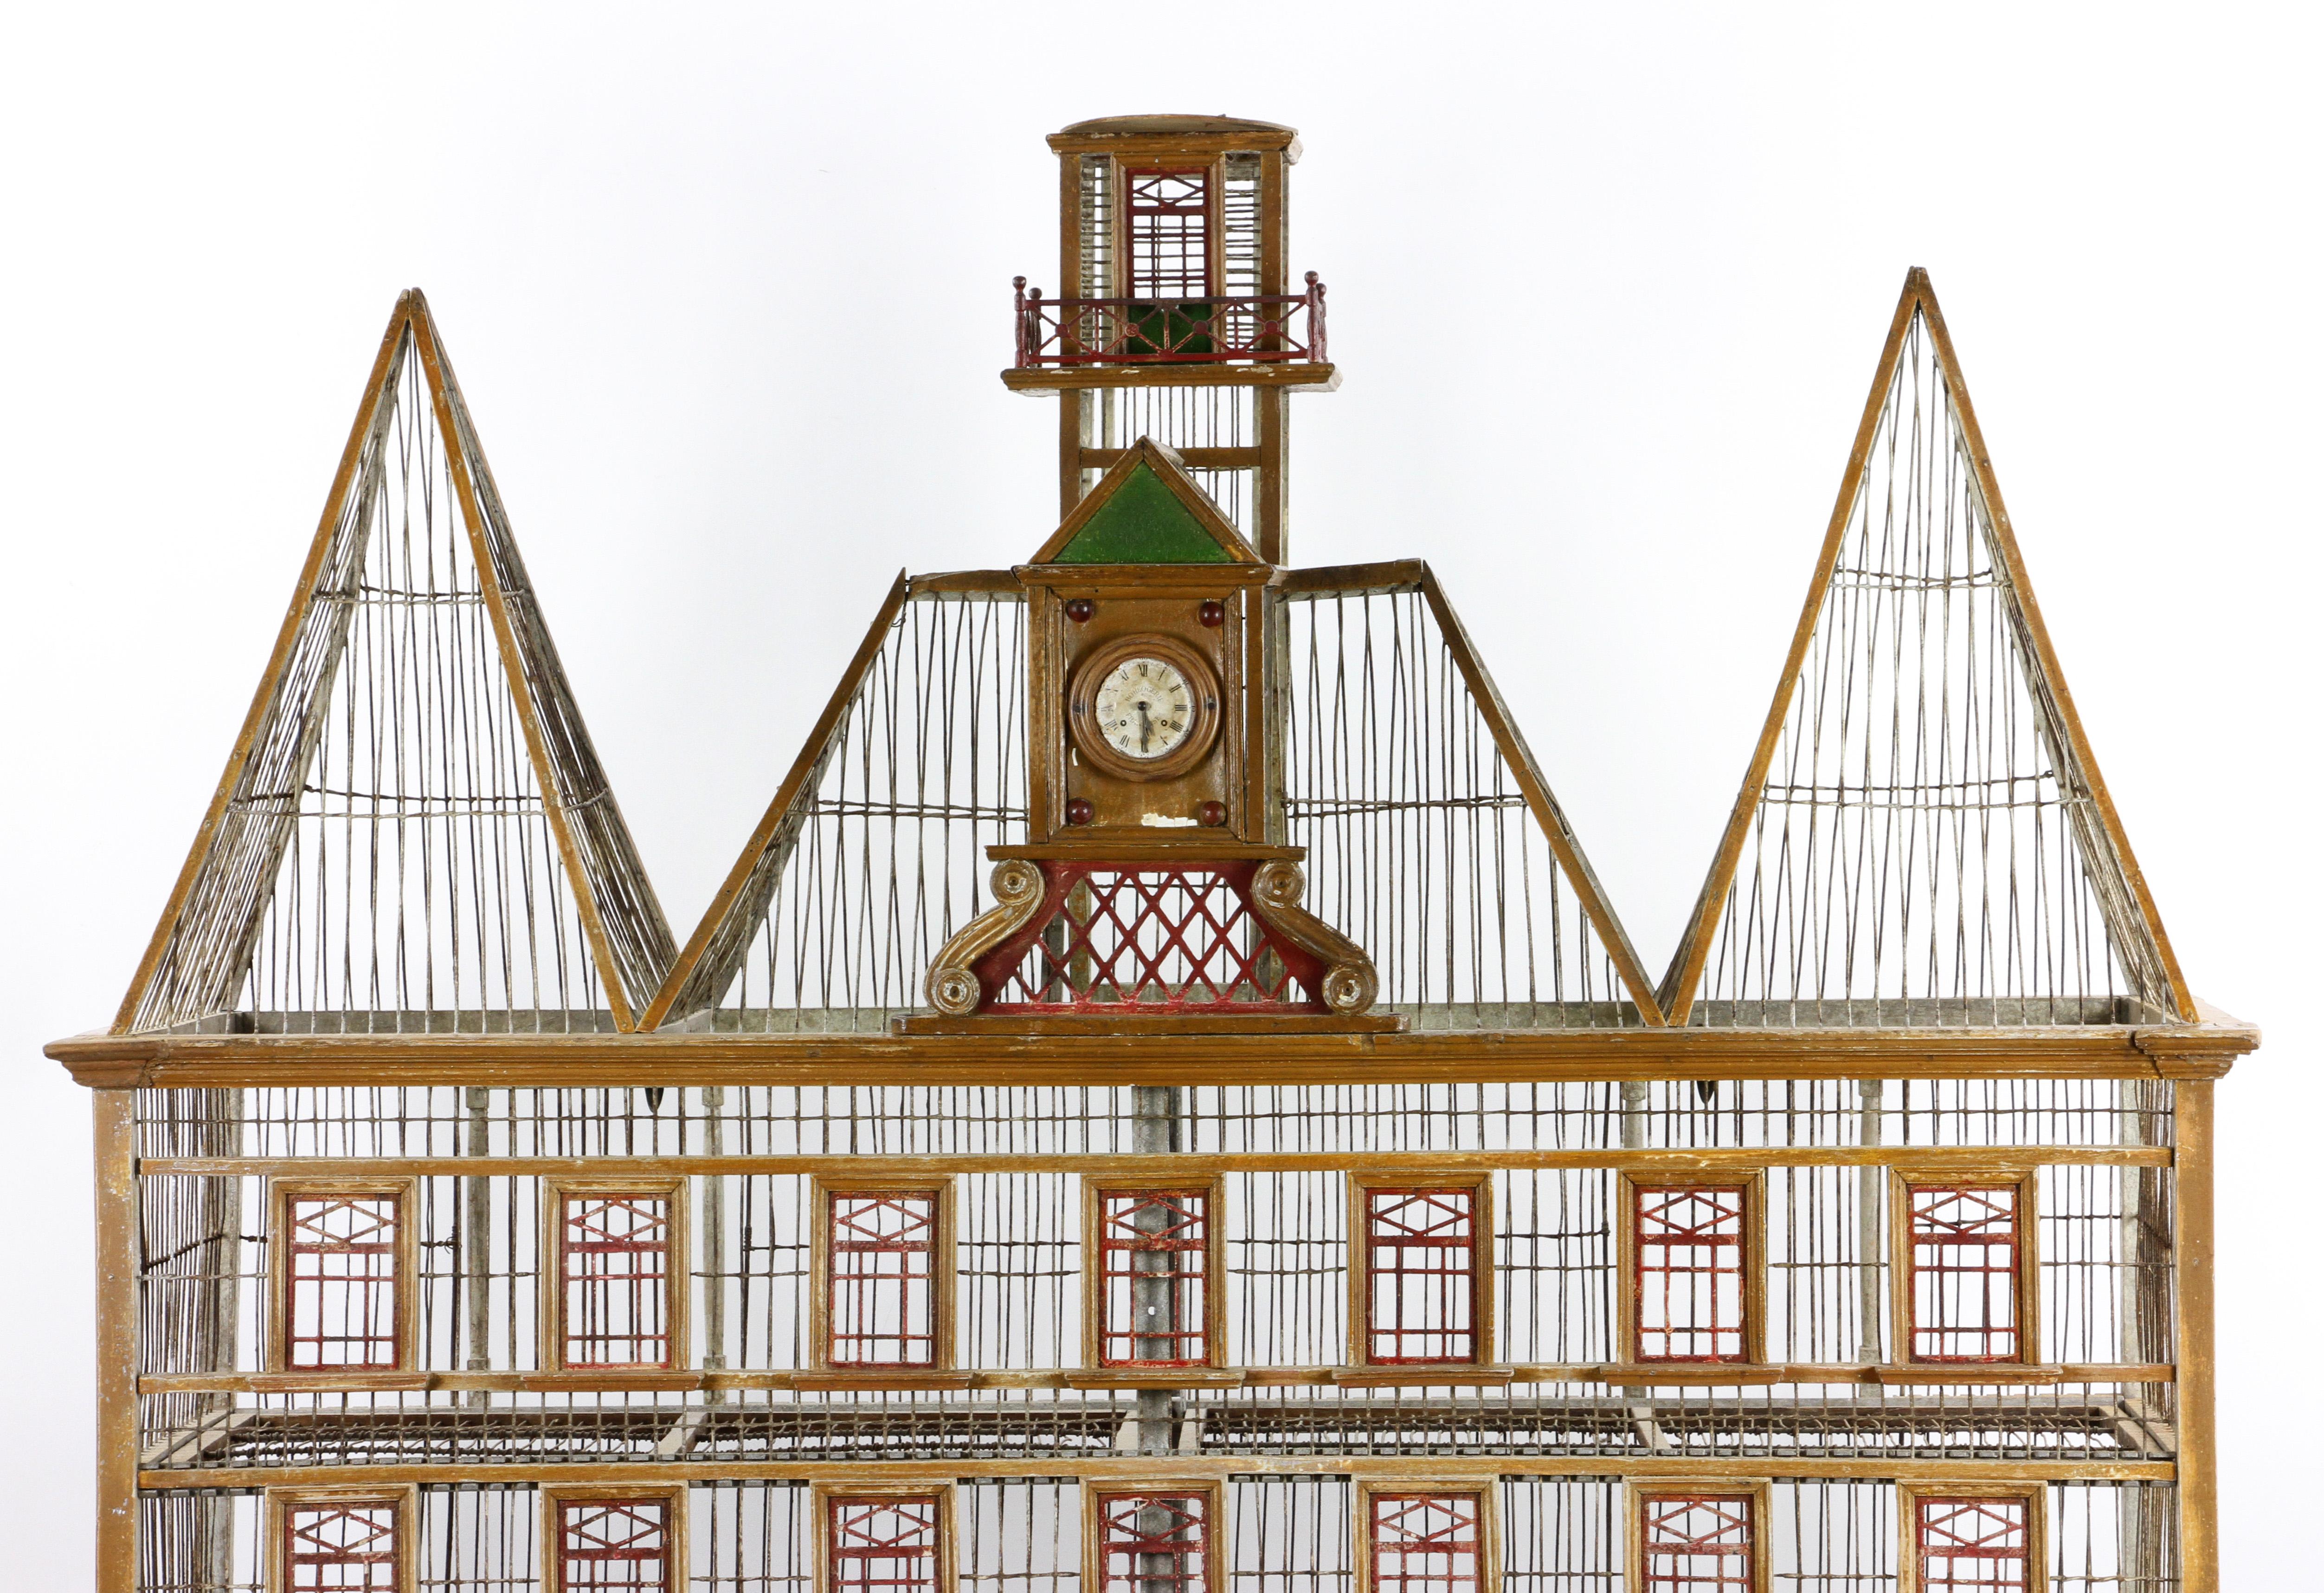 Rare early 20th century. French two-level bird house made of wood, wire, and metal, two levels, with clock face marked 